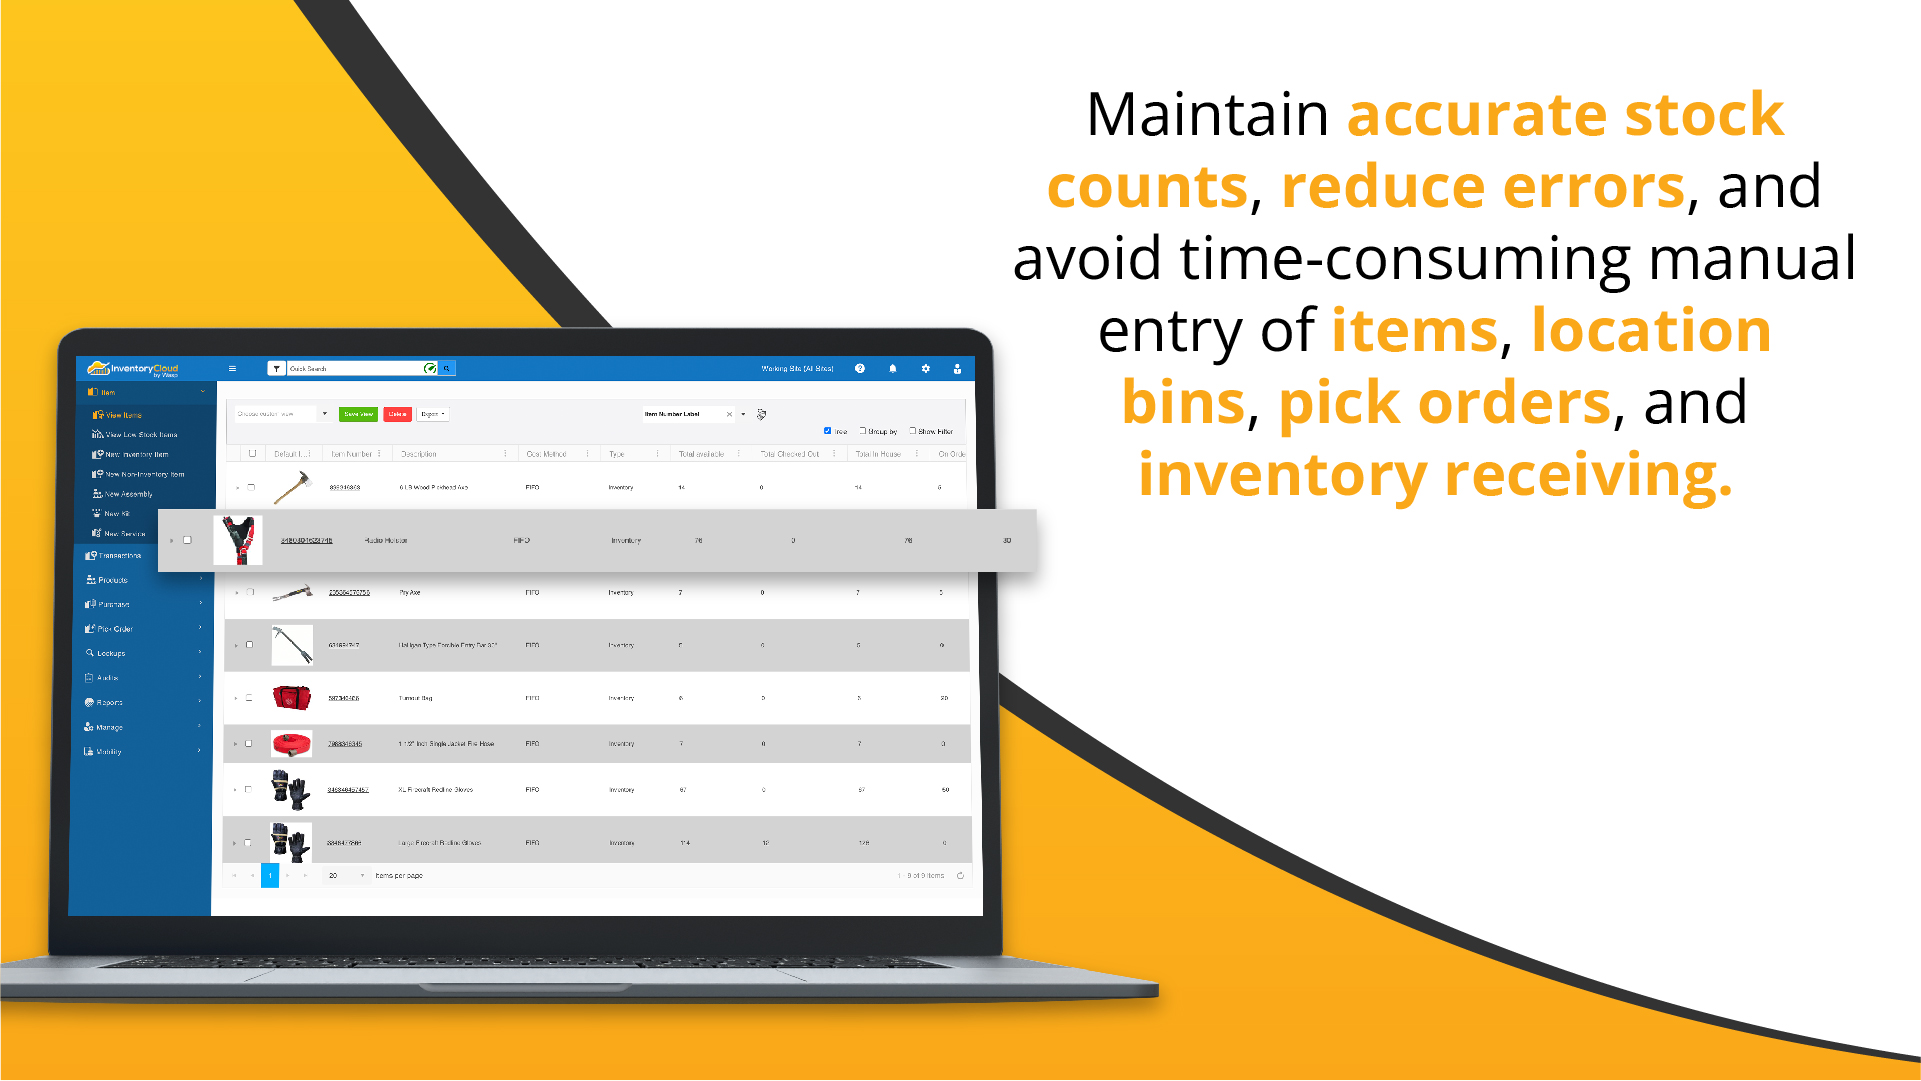 Maintain accurate stock counts, reduce errors, and avoid time-consuming manual entry of items, location bins, pick orders, and inventory receiving